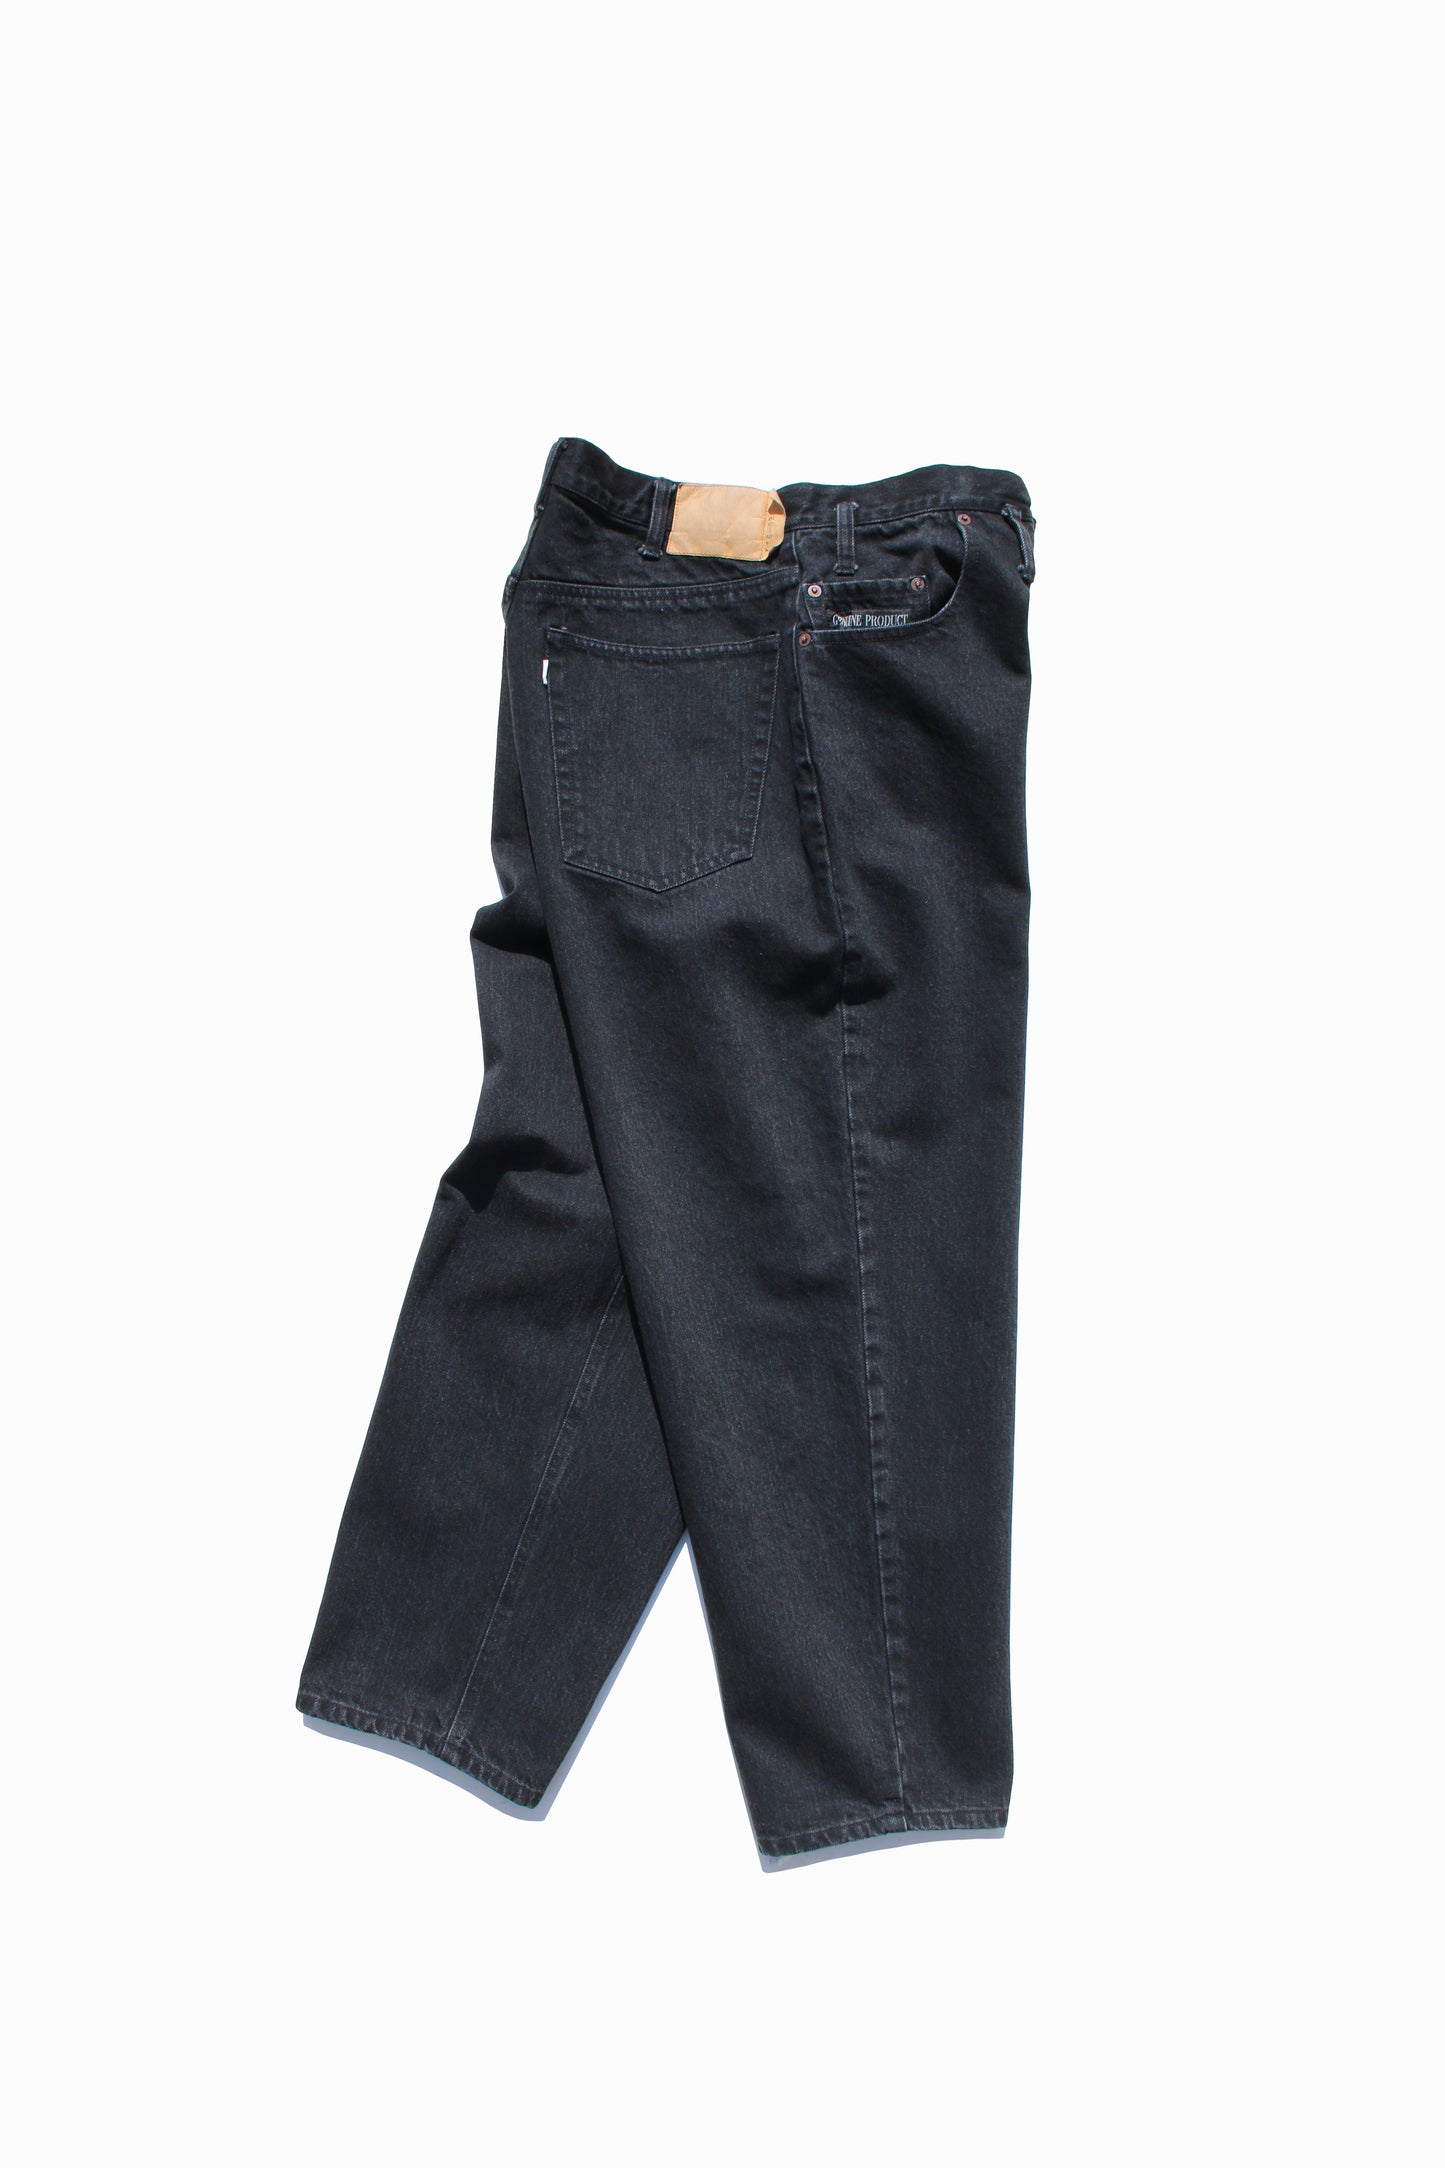 ESSAY BAGGY TUCKED JEANS - BLACK